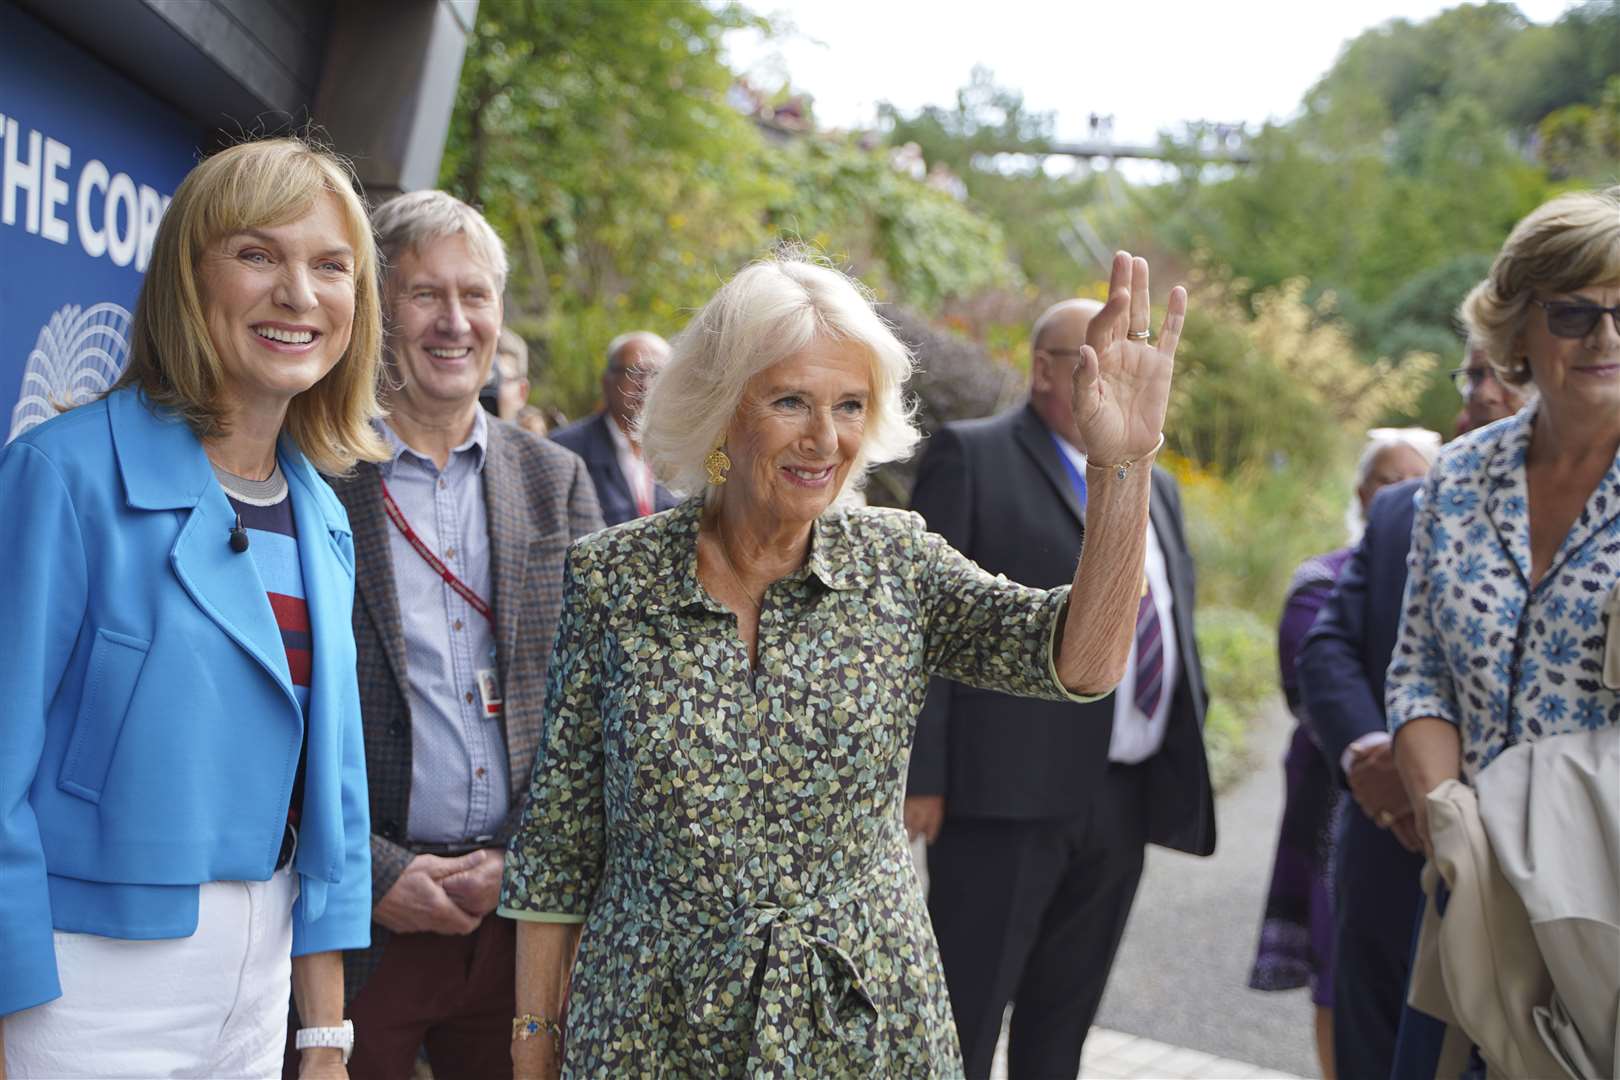 During the visit, Camilla also stopped to talk to members of the public (Hugh Hastings/PA)